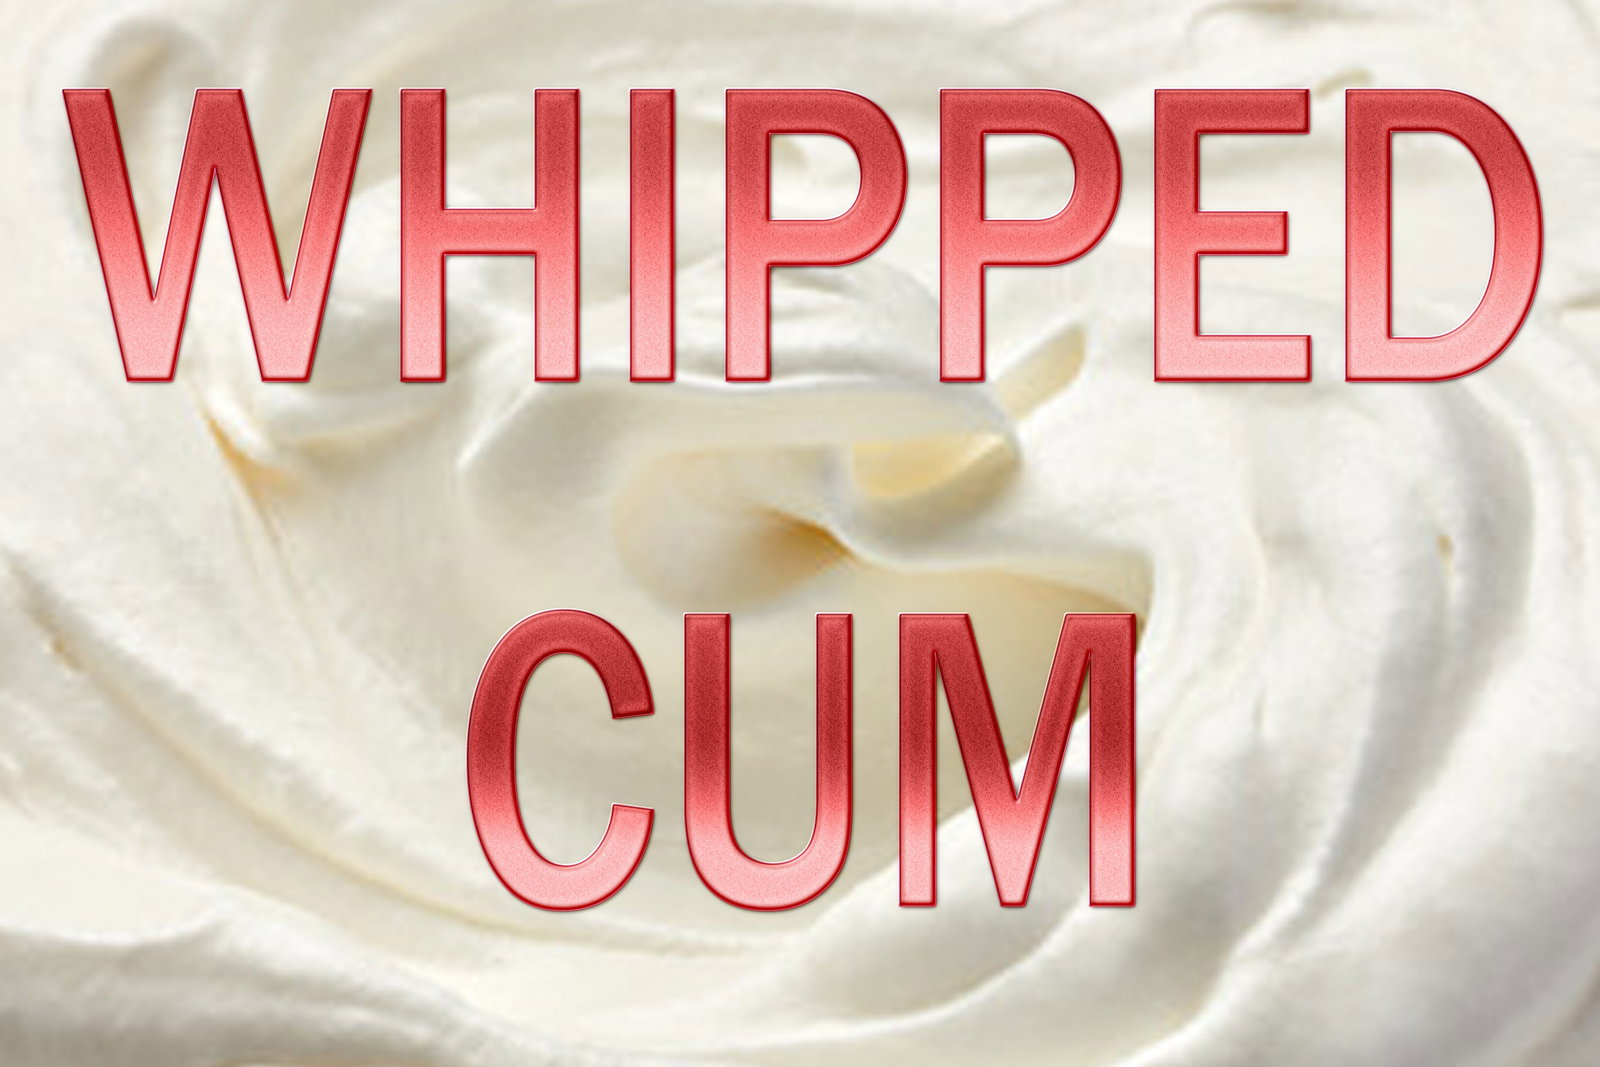 Photo by DivineMissDeviant with the username @TheDeviantDomme, who is a star user,  January 12, 2021 at 4:02 PM and the text says 'EROTIC AUDIO - WHIPPED CUM

Prepare to be addicted to your own special whipped cream.

@ManyVids https://www.manyvids.com/Video/2490122/whipped-cum/

@IWantClips https://iwantclips.com/store/734637/missdeviant/2310802

@clipsforsale..'